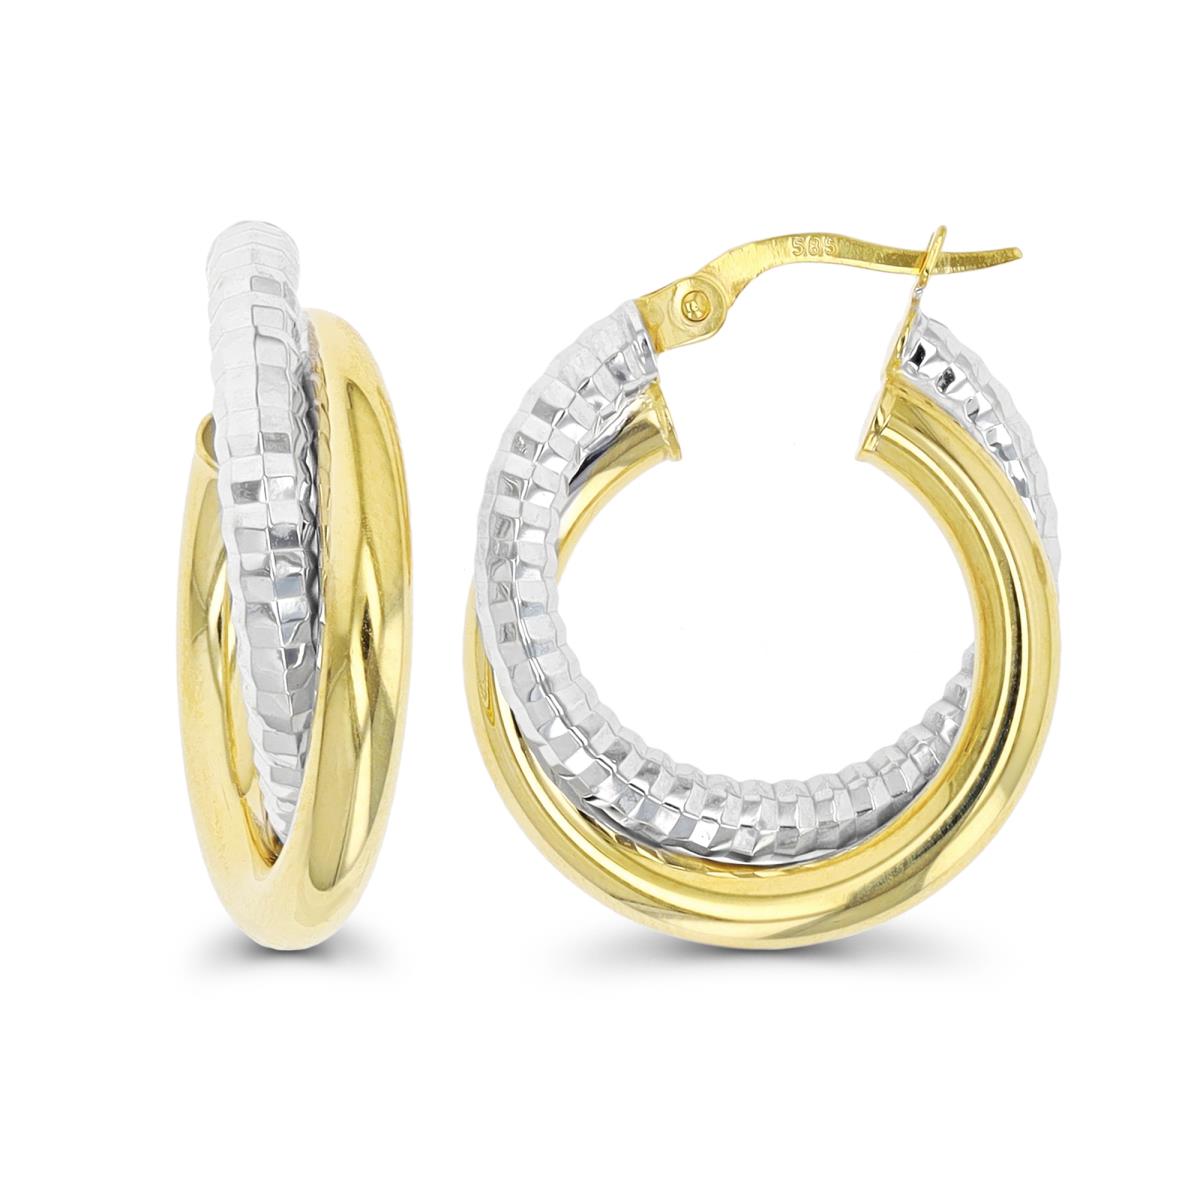 14K Tw-Tone Gold Polished & DC Overlapping Hoop Earring